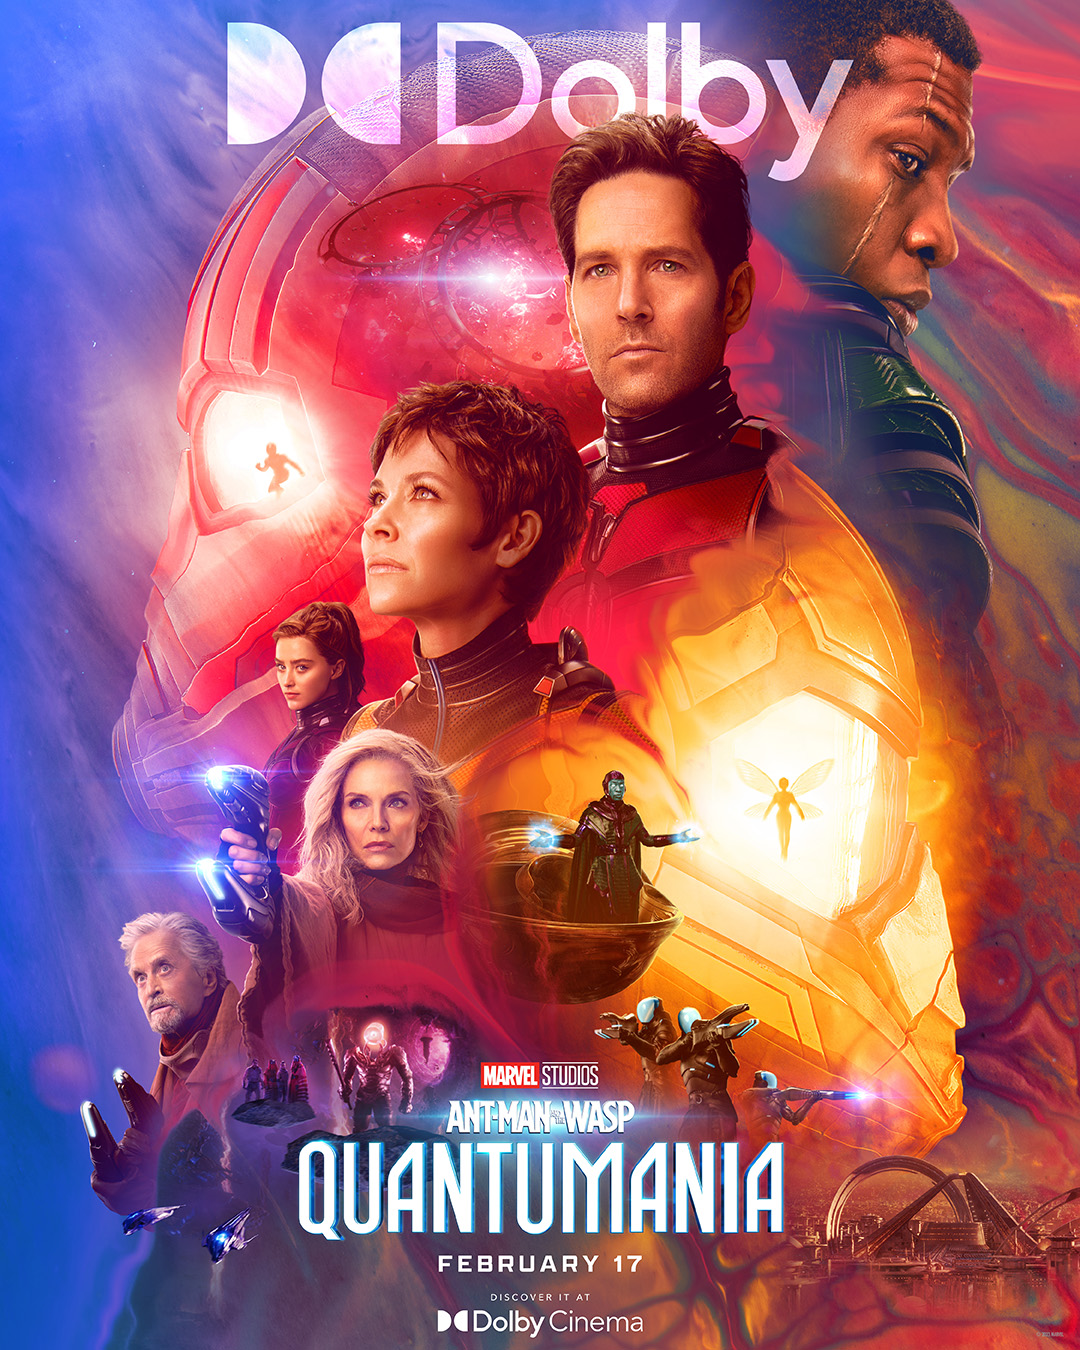  Marvel Studios' Ant-Man and The Wasp: Quantumania | Dolby Poster